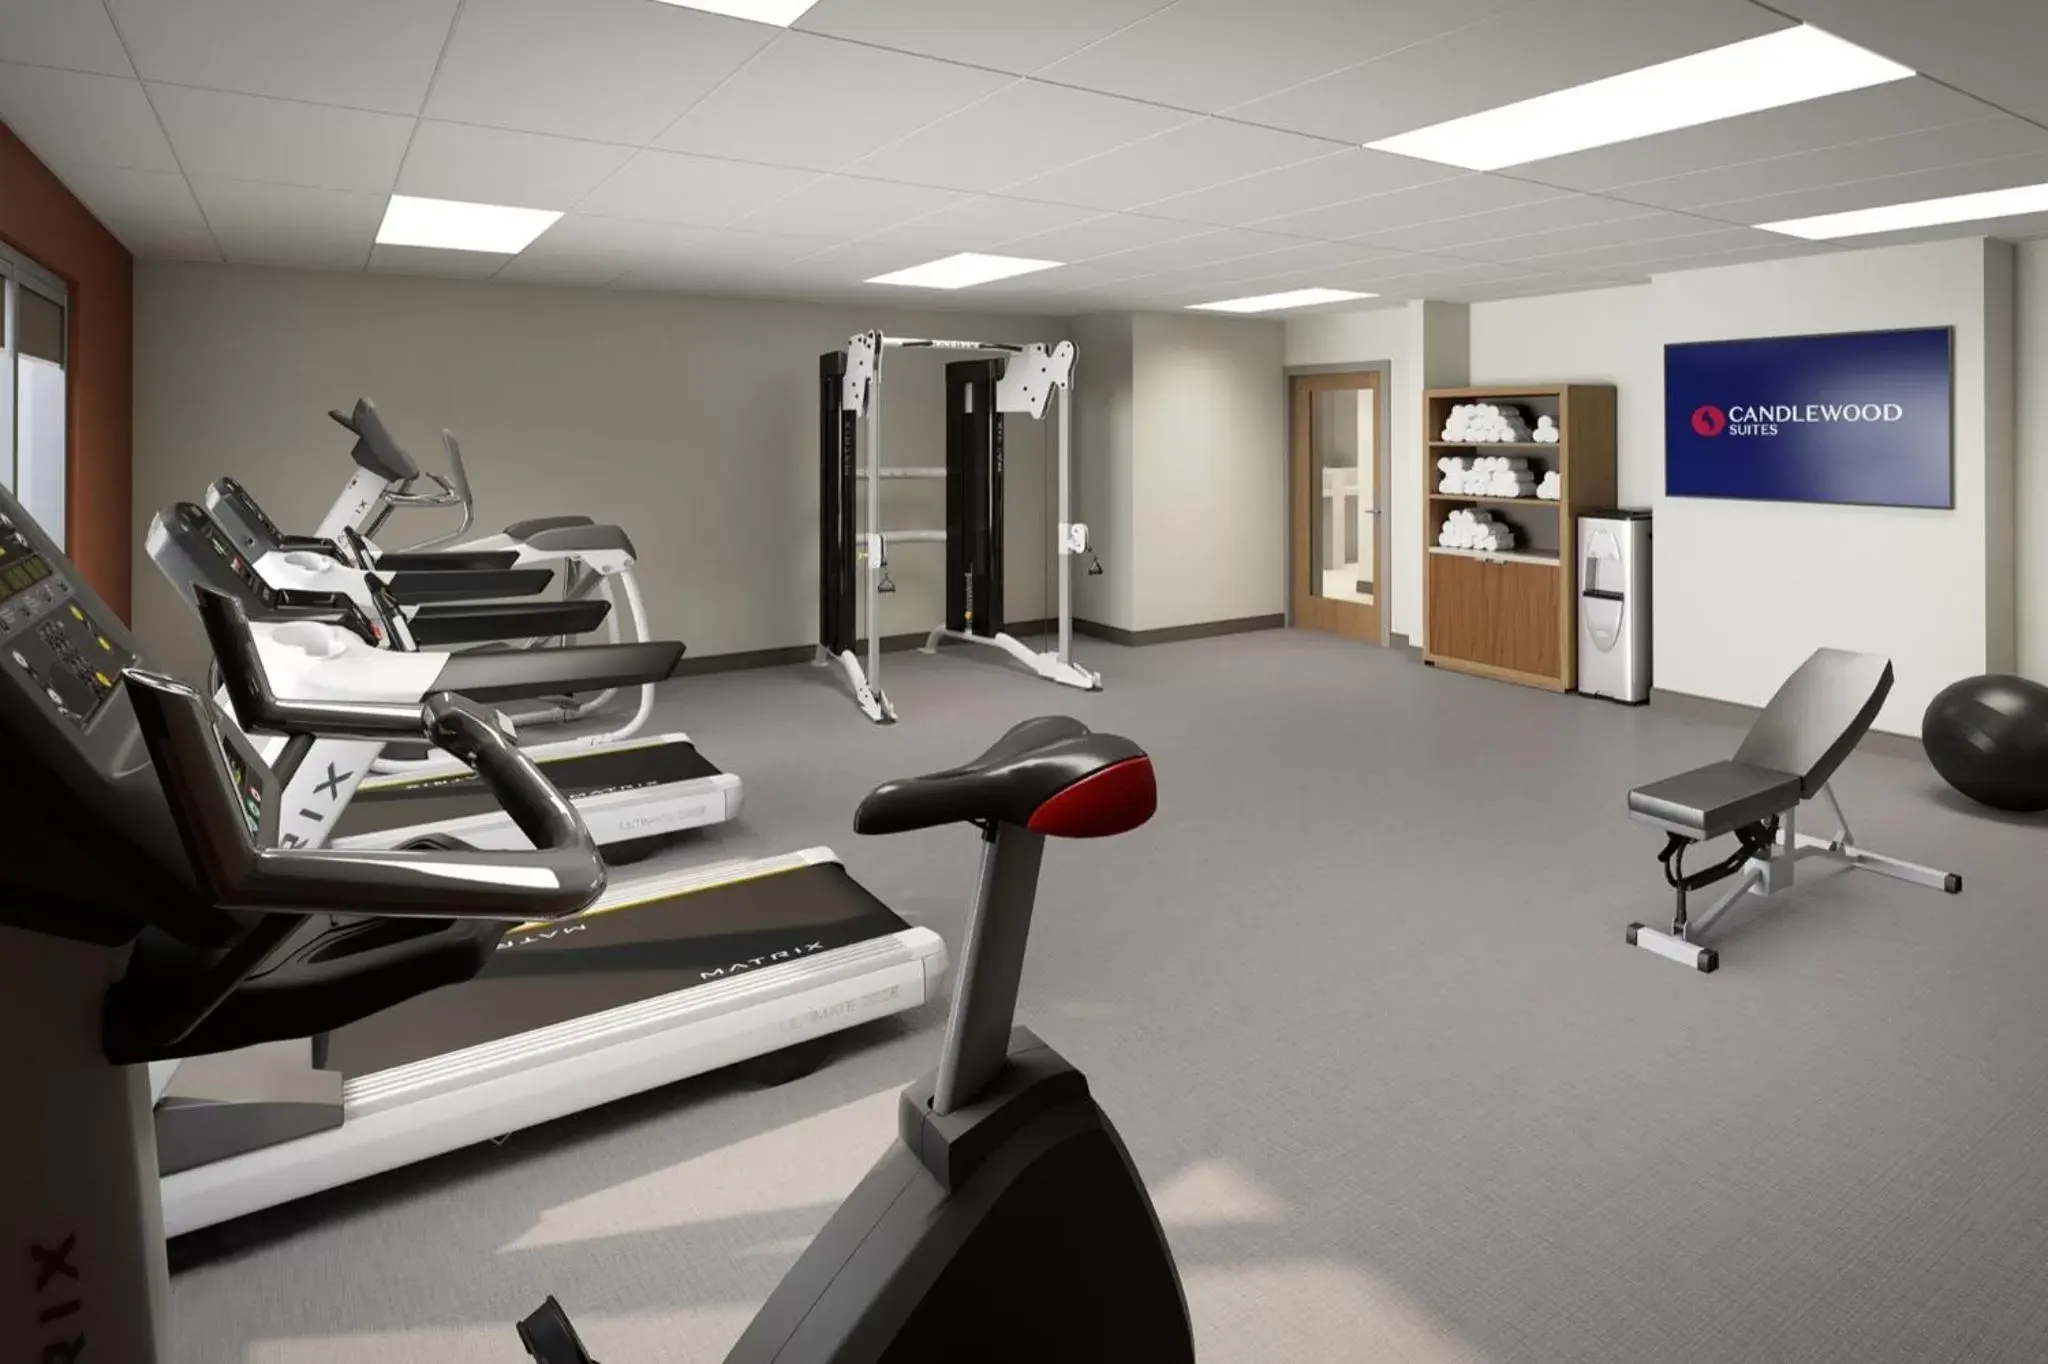 Fitness centre/facilities, Fitness Center/Facilities in Candlewood Suites - Tulsa Hills - Jenks, an IHG Hotel